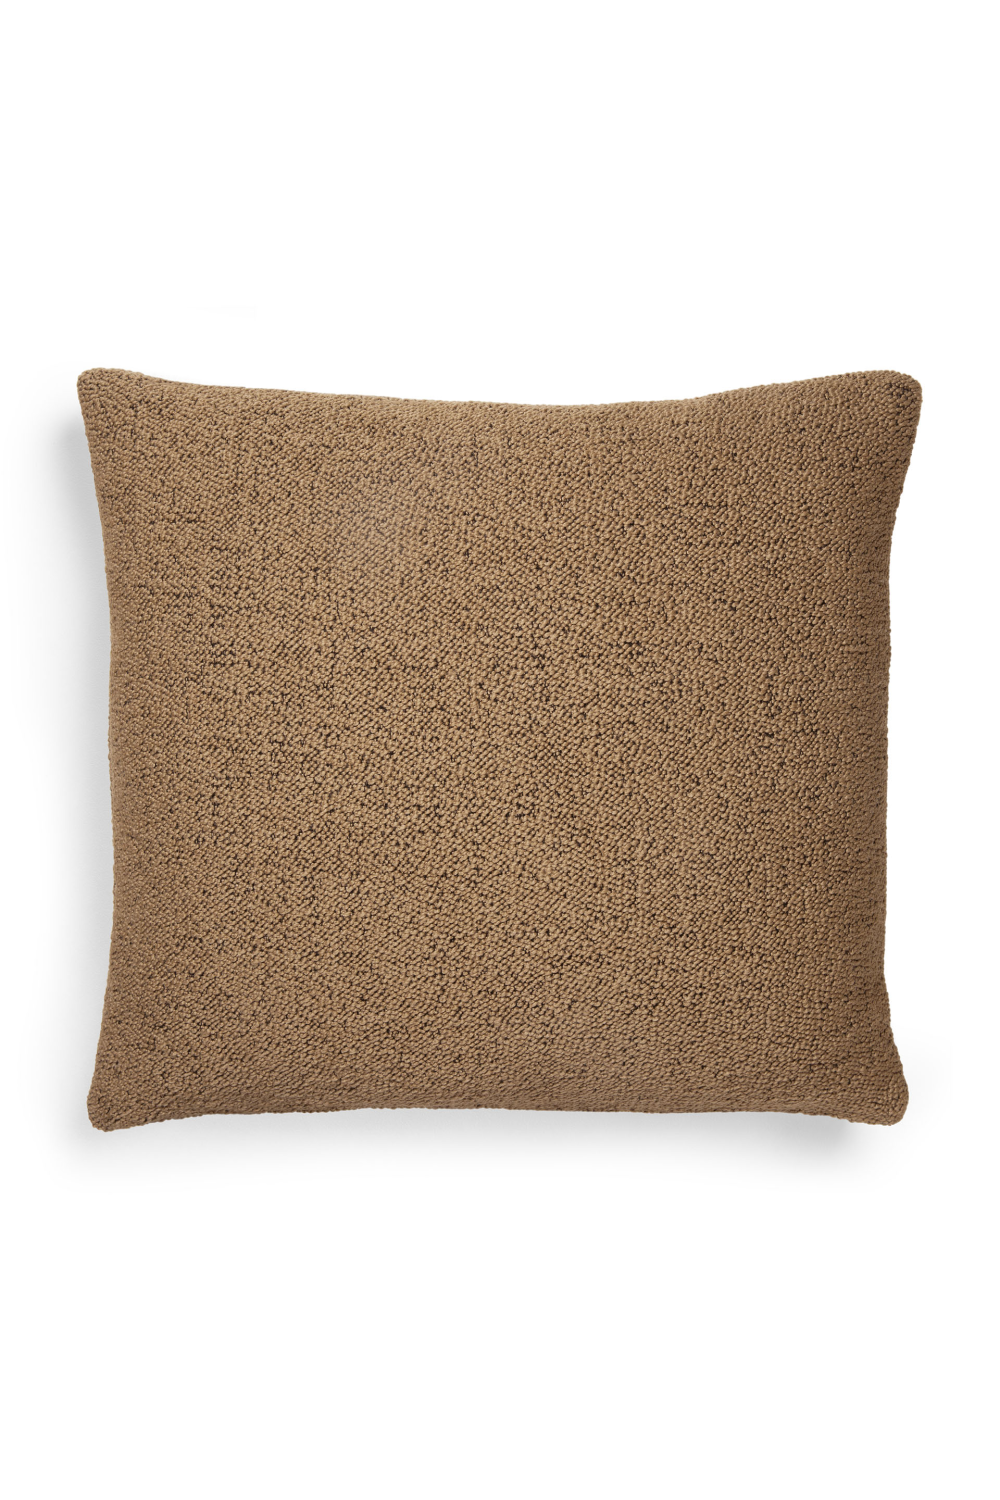 Cumin Brown Outdoor Cushion | Ethnicraft Nomad | Woodfurniture.com